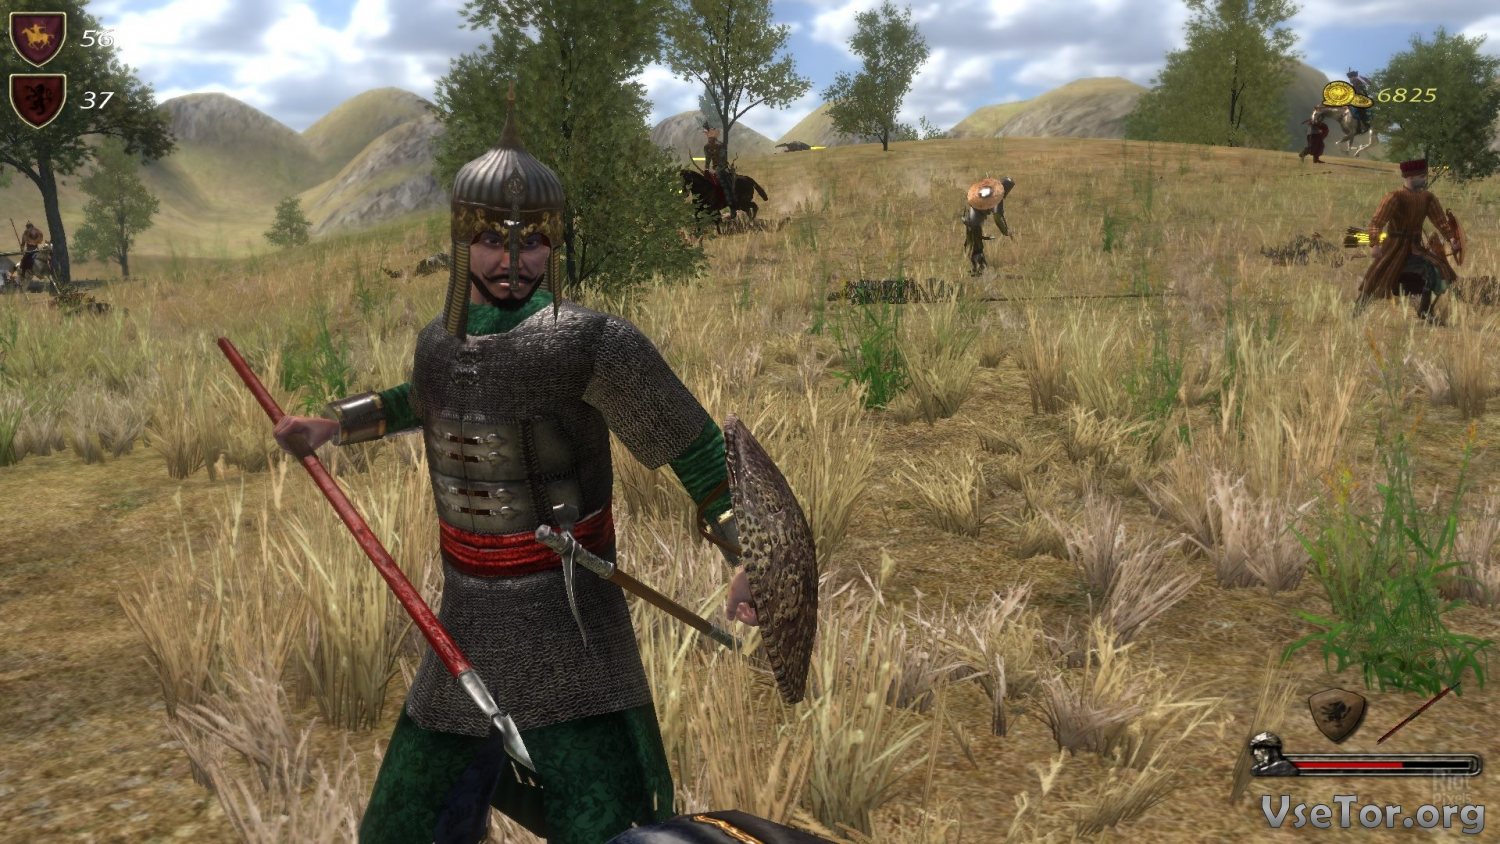 След огнем и мечом. Маунт блейд. Mount and Blade with Fire and Sword. Mount & Blade: огнём и мечом. Mount and Blade Великие битвы.